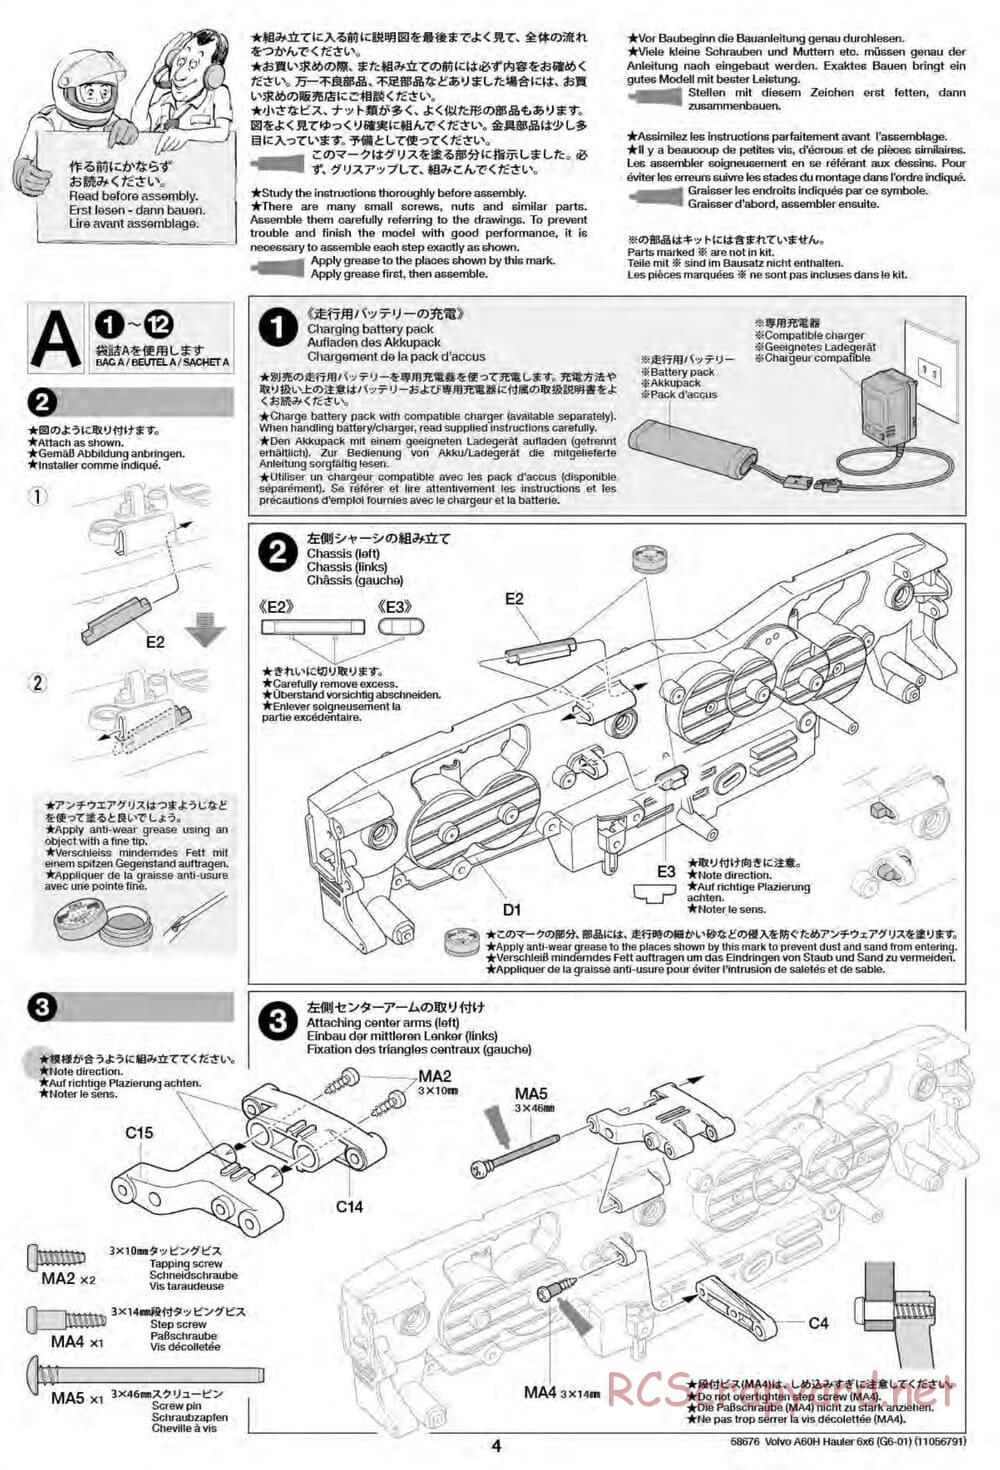 Tamiya - Volvo A60H Dump Truck 6x6 - G6-01 Chassis - Manual - Page 4